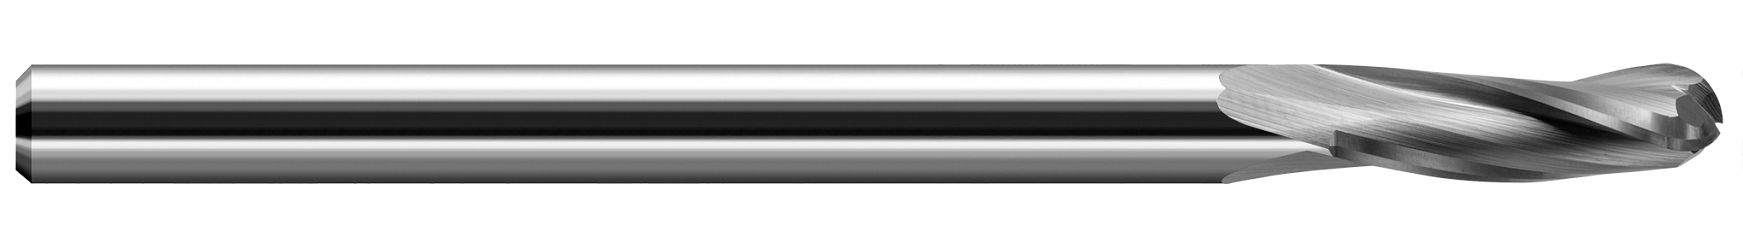 End Mills for Plastics-Finishers-Ball Upcut-3 Flute-Slow Helix